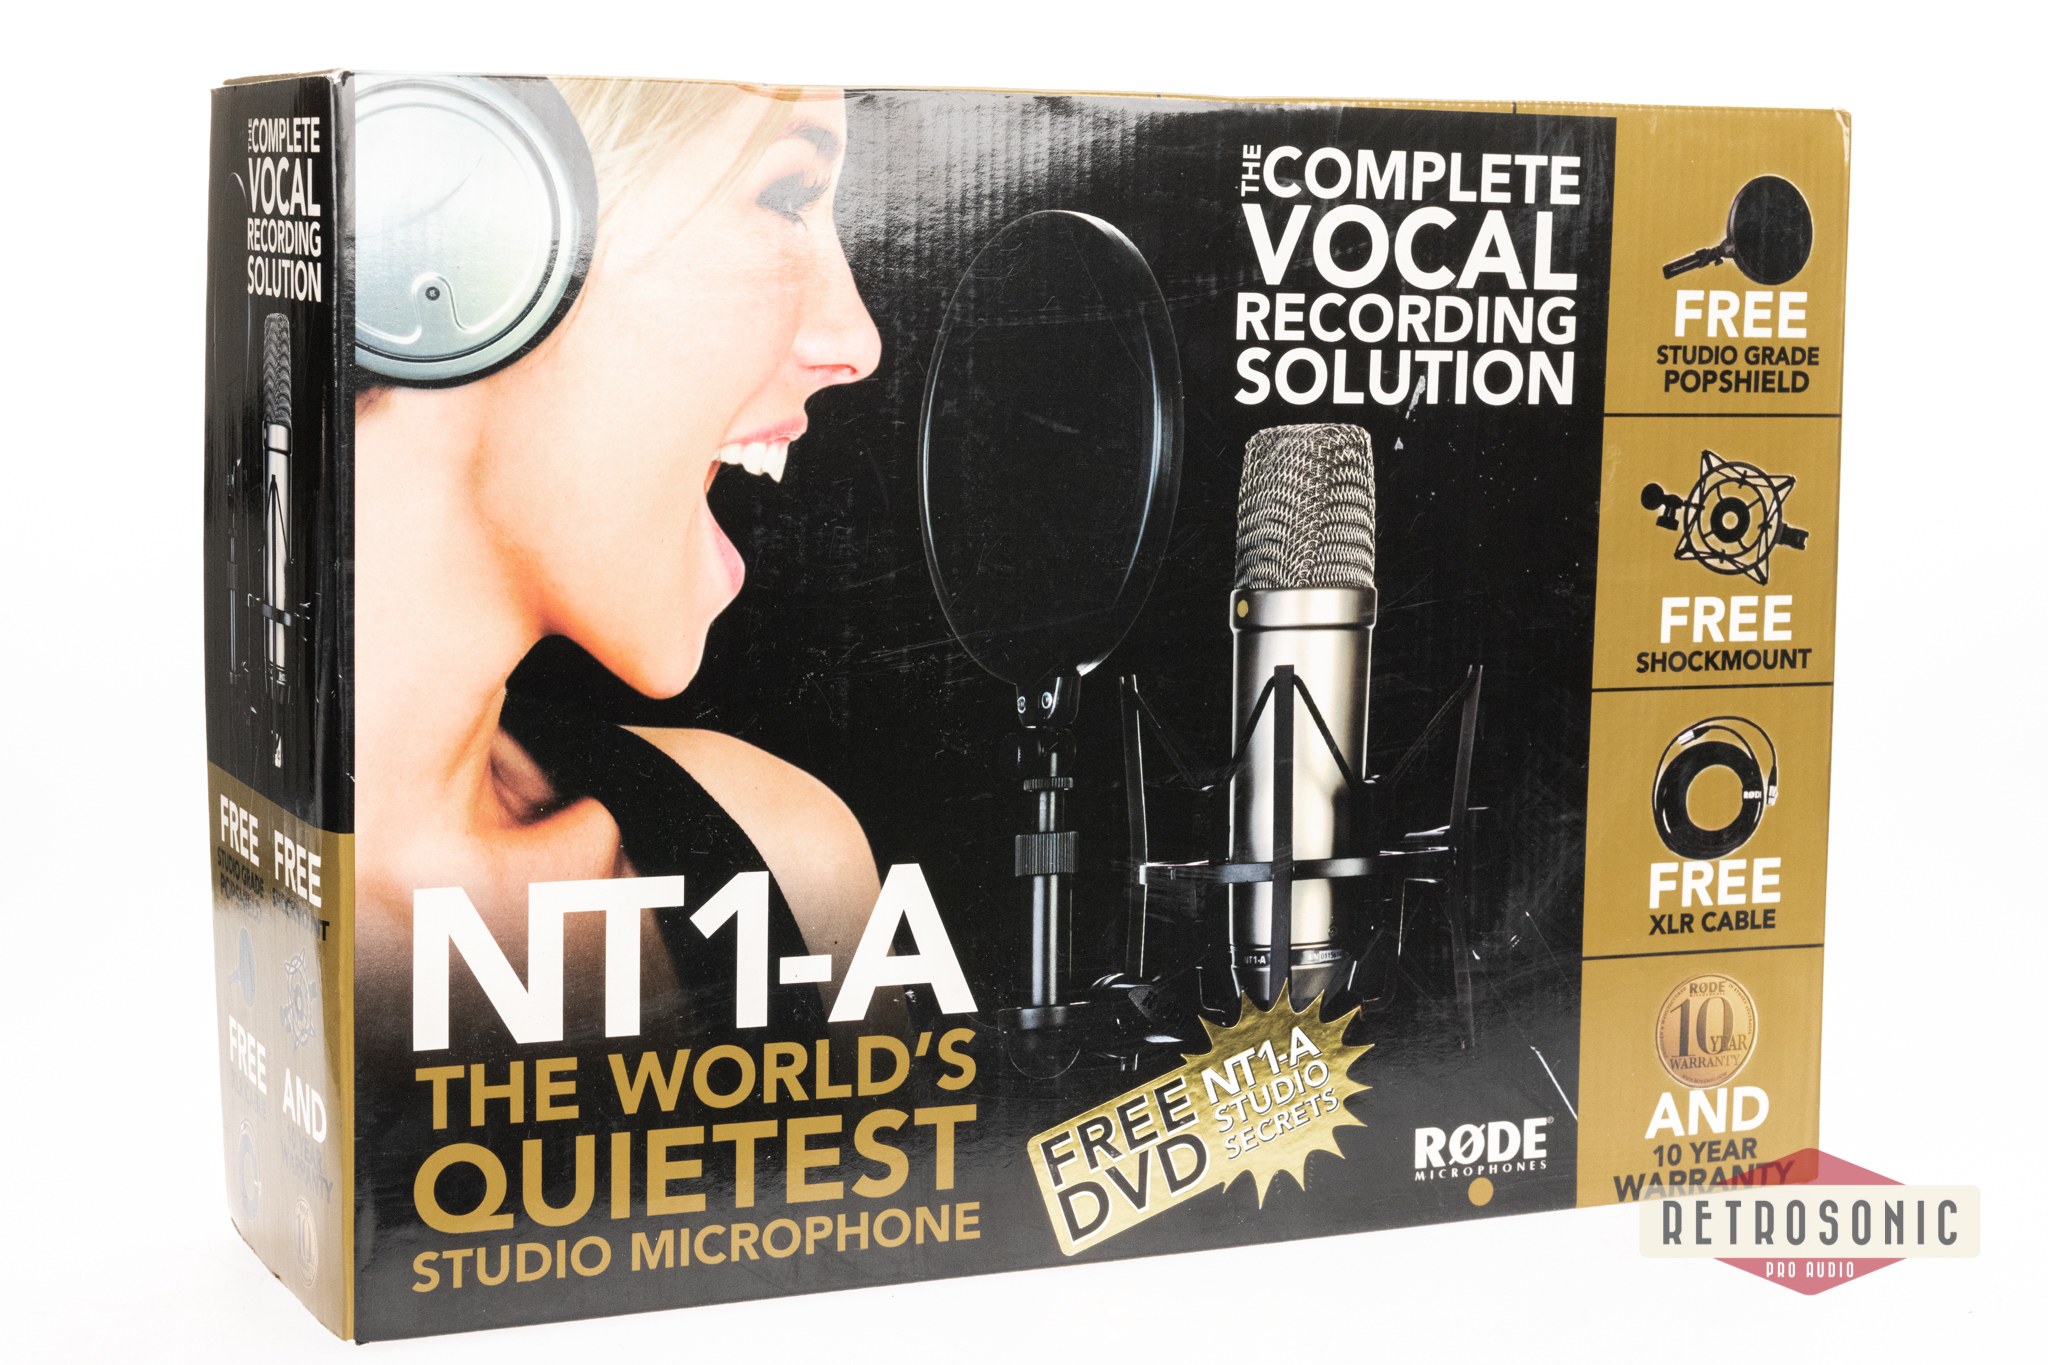 Rode NT1A Cardioid Condenser Mic